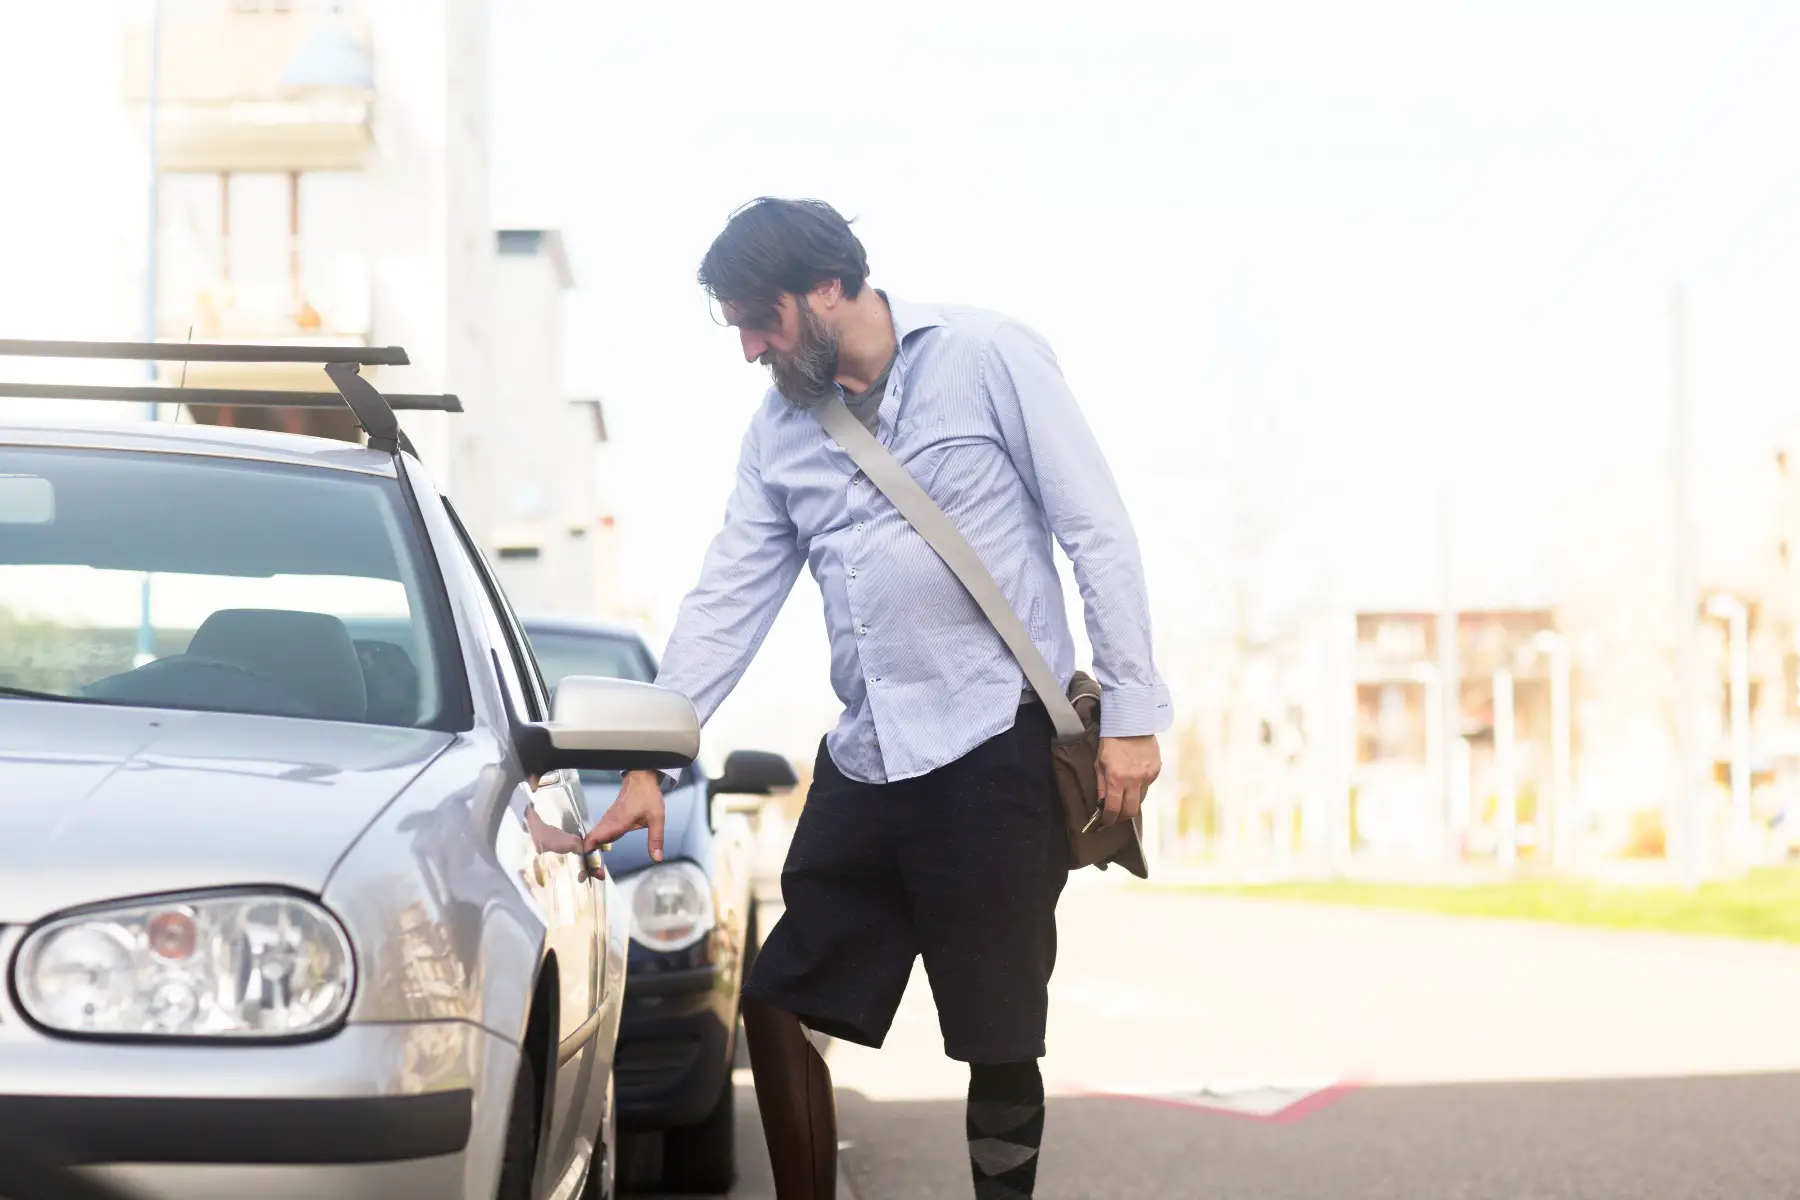 Man with a prosthetic leg ready to open his car.